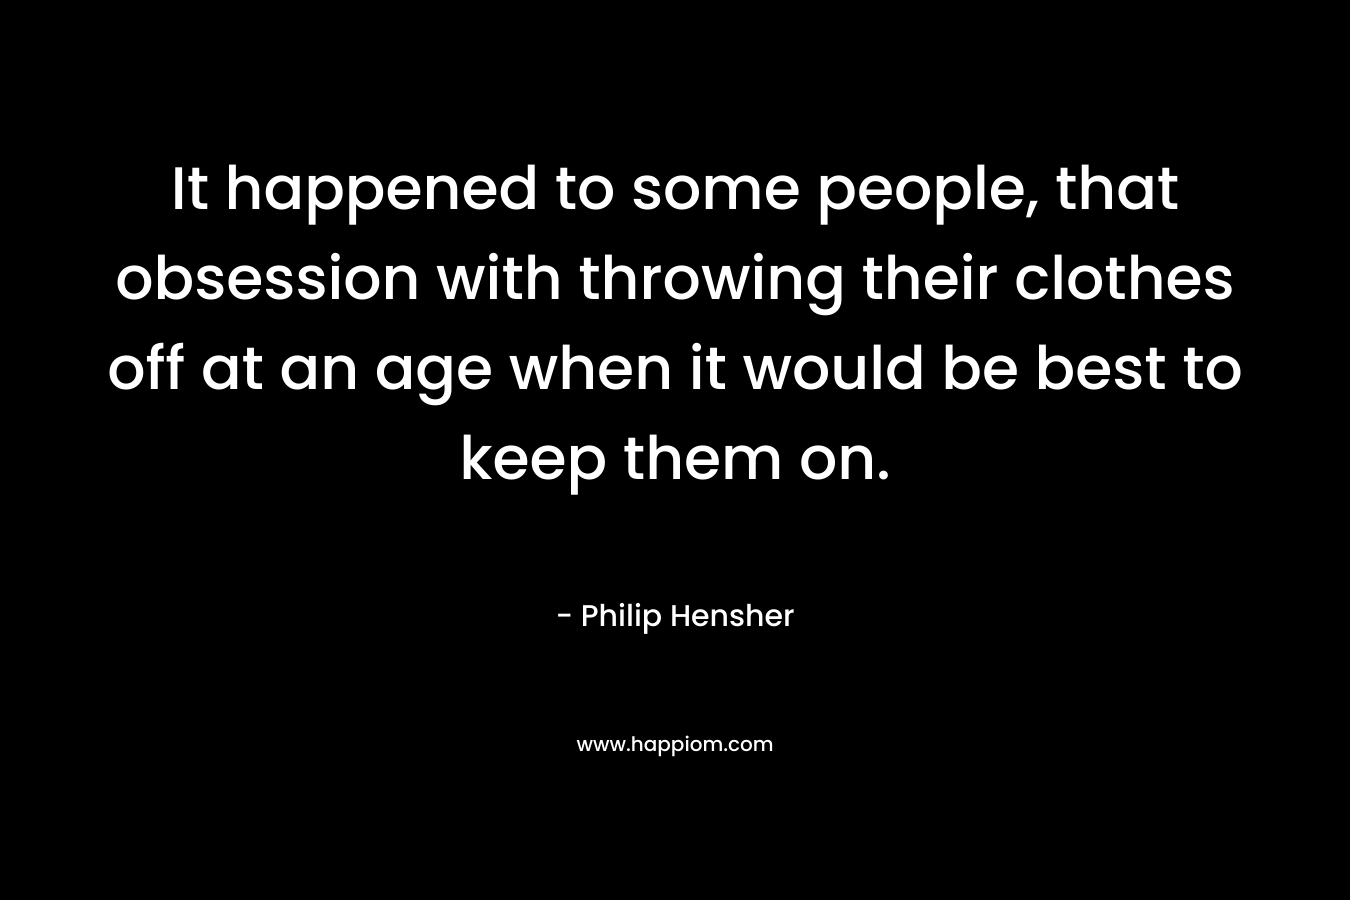 It happened to some people, that obsession with throwing their clothes off at an age when it would be best to keep them on.